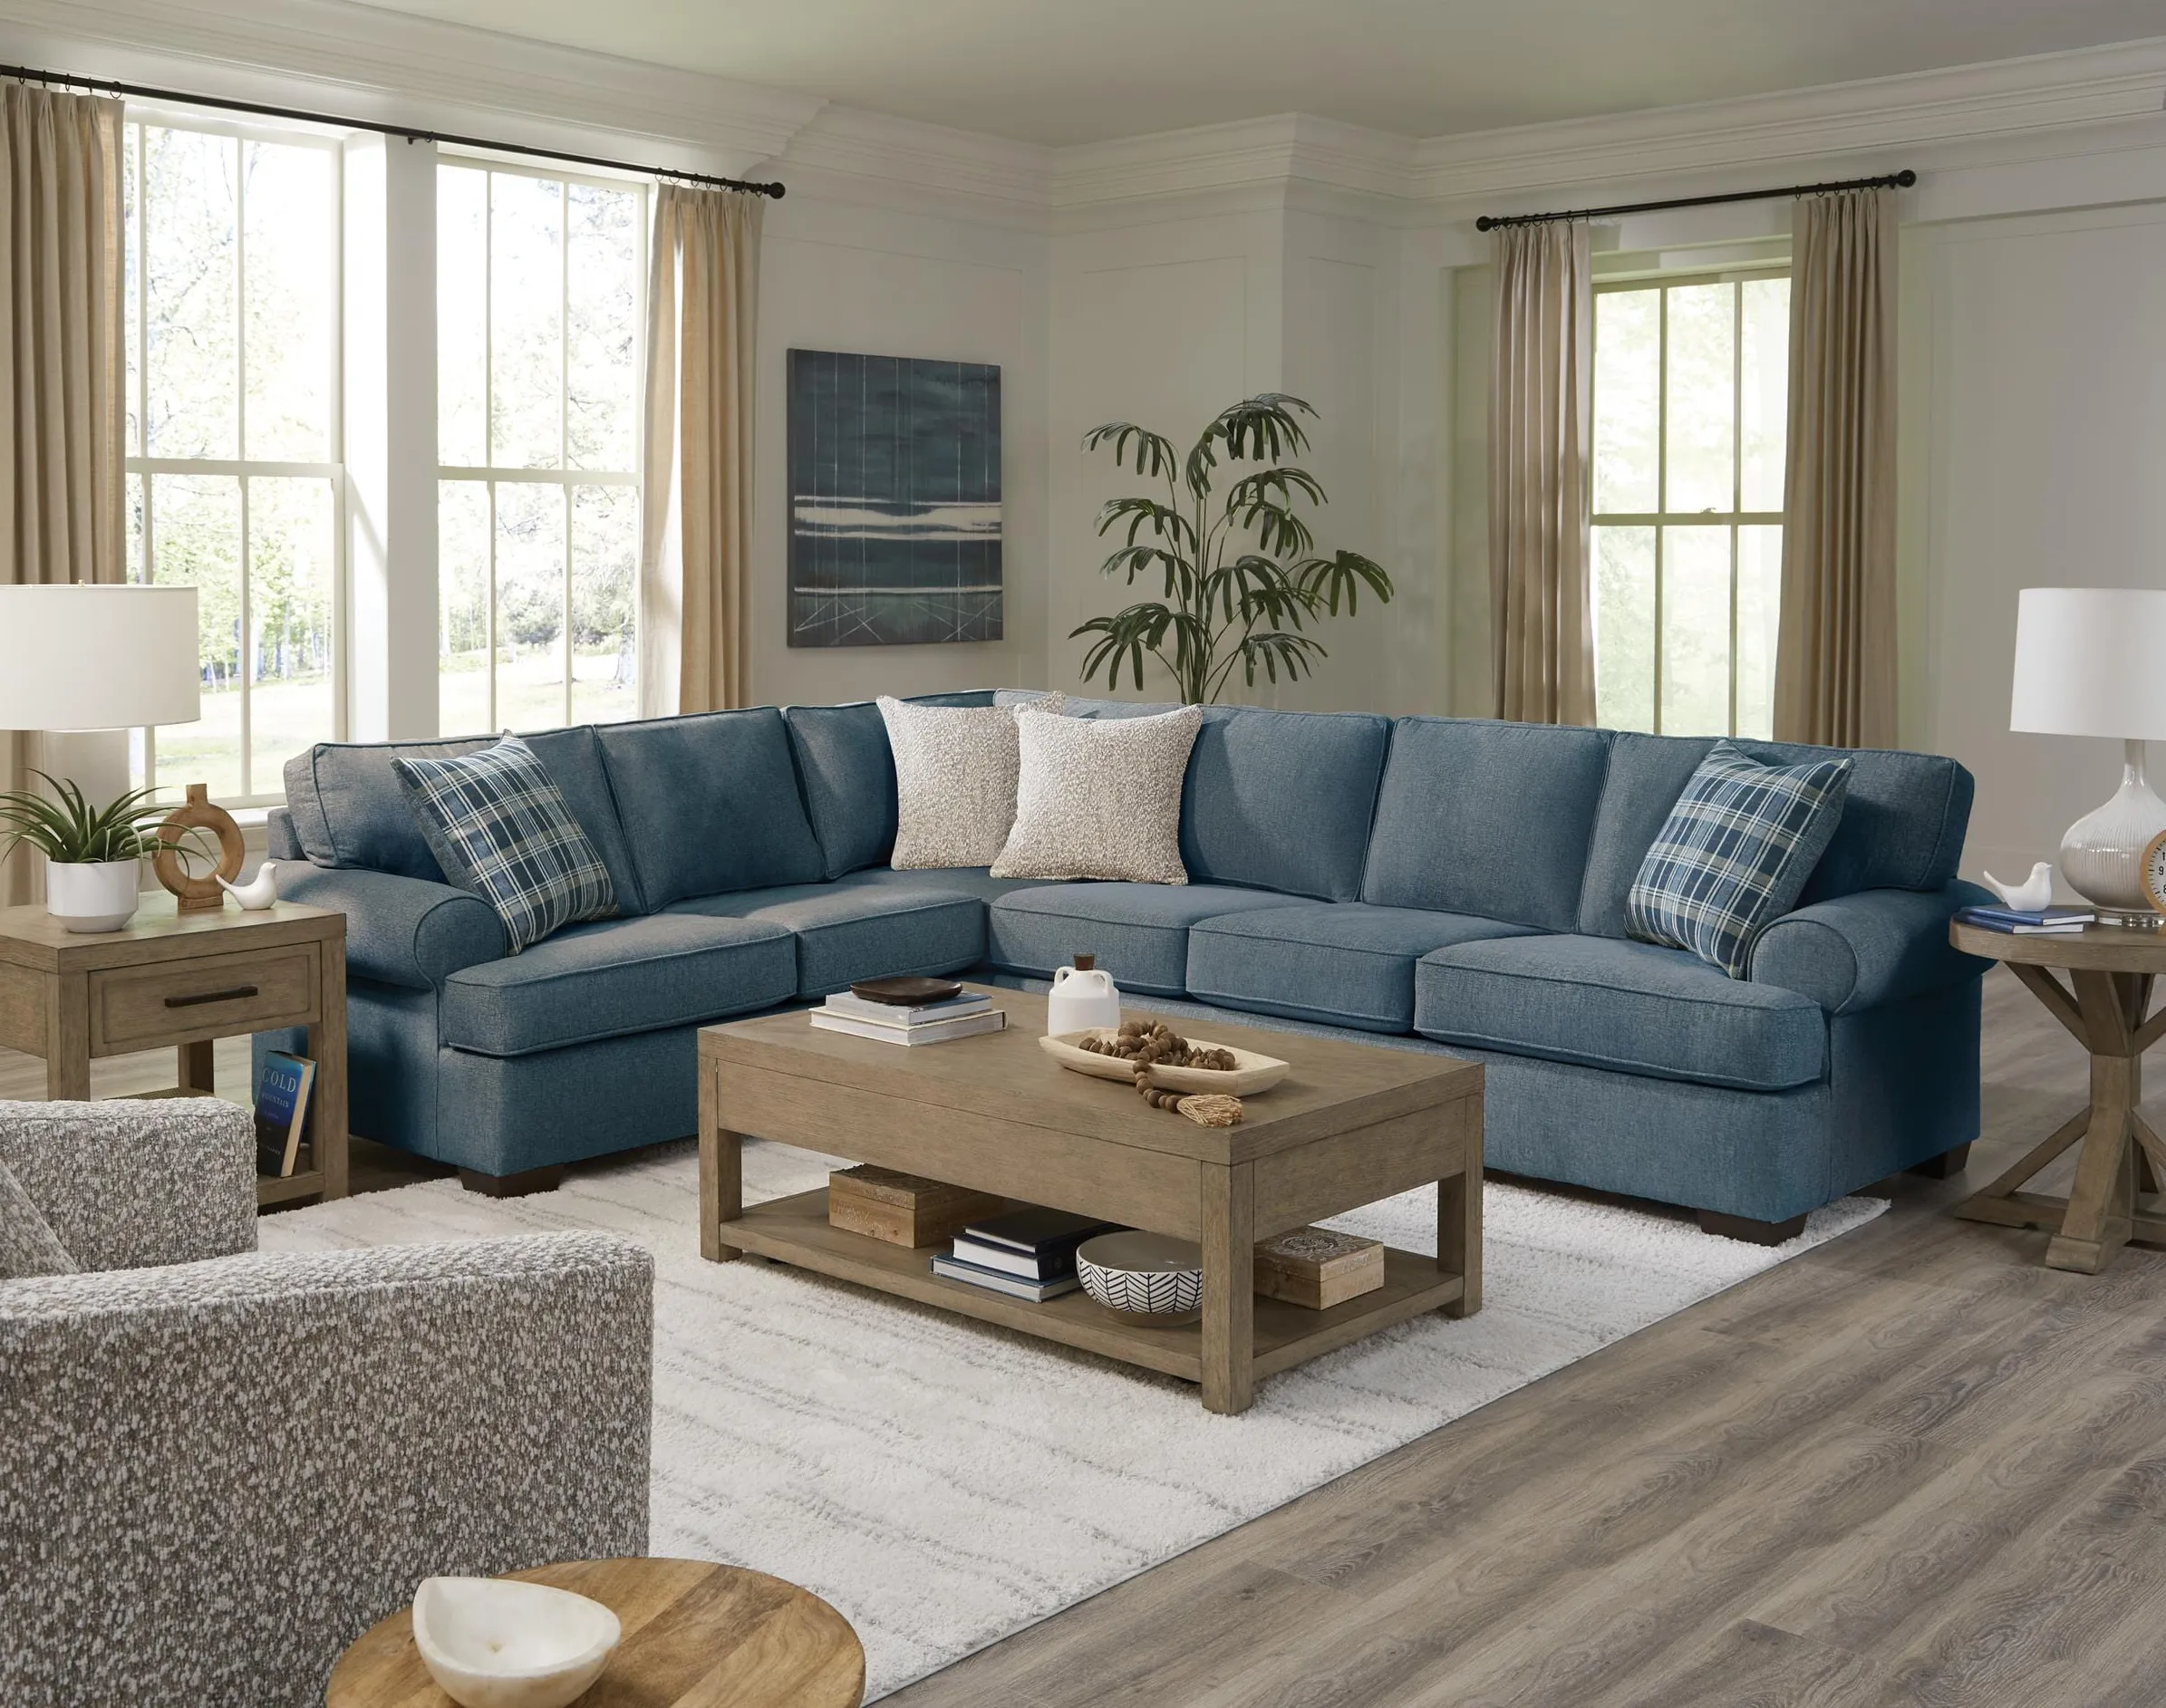 Quaker 2-Pc. Sectional in Navy